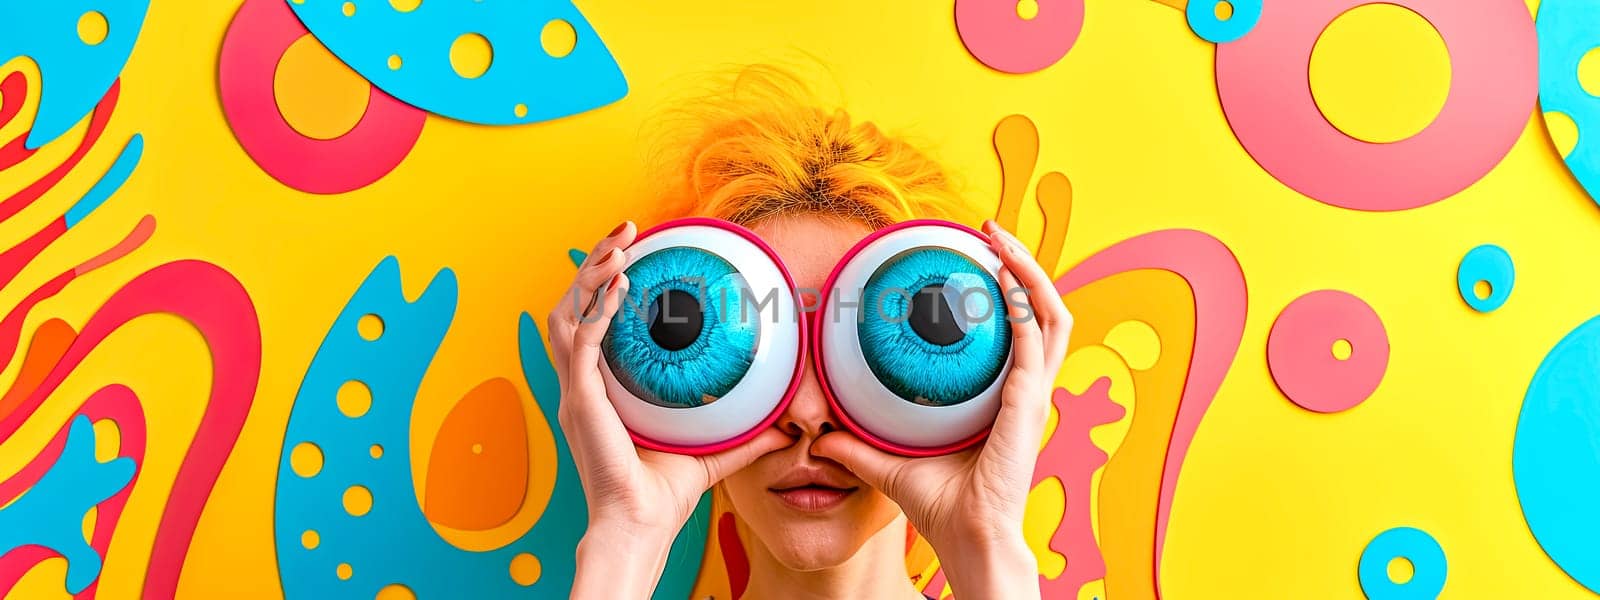 Surreal Eyeball Props with Vibrant Pop Art on Yellow Background - Quirky and Artistic Imagery.